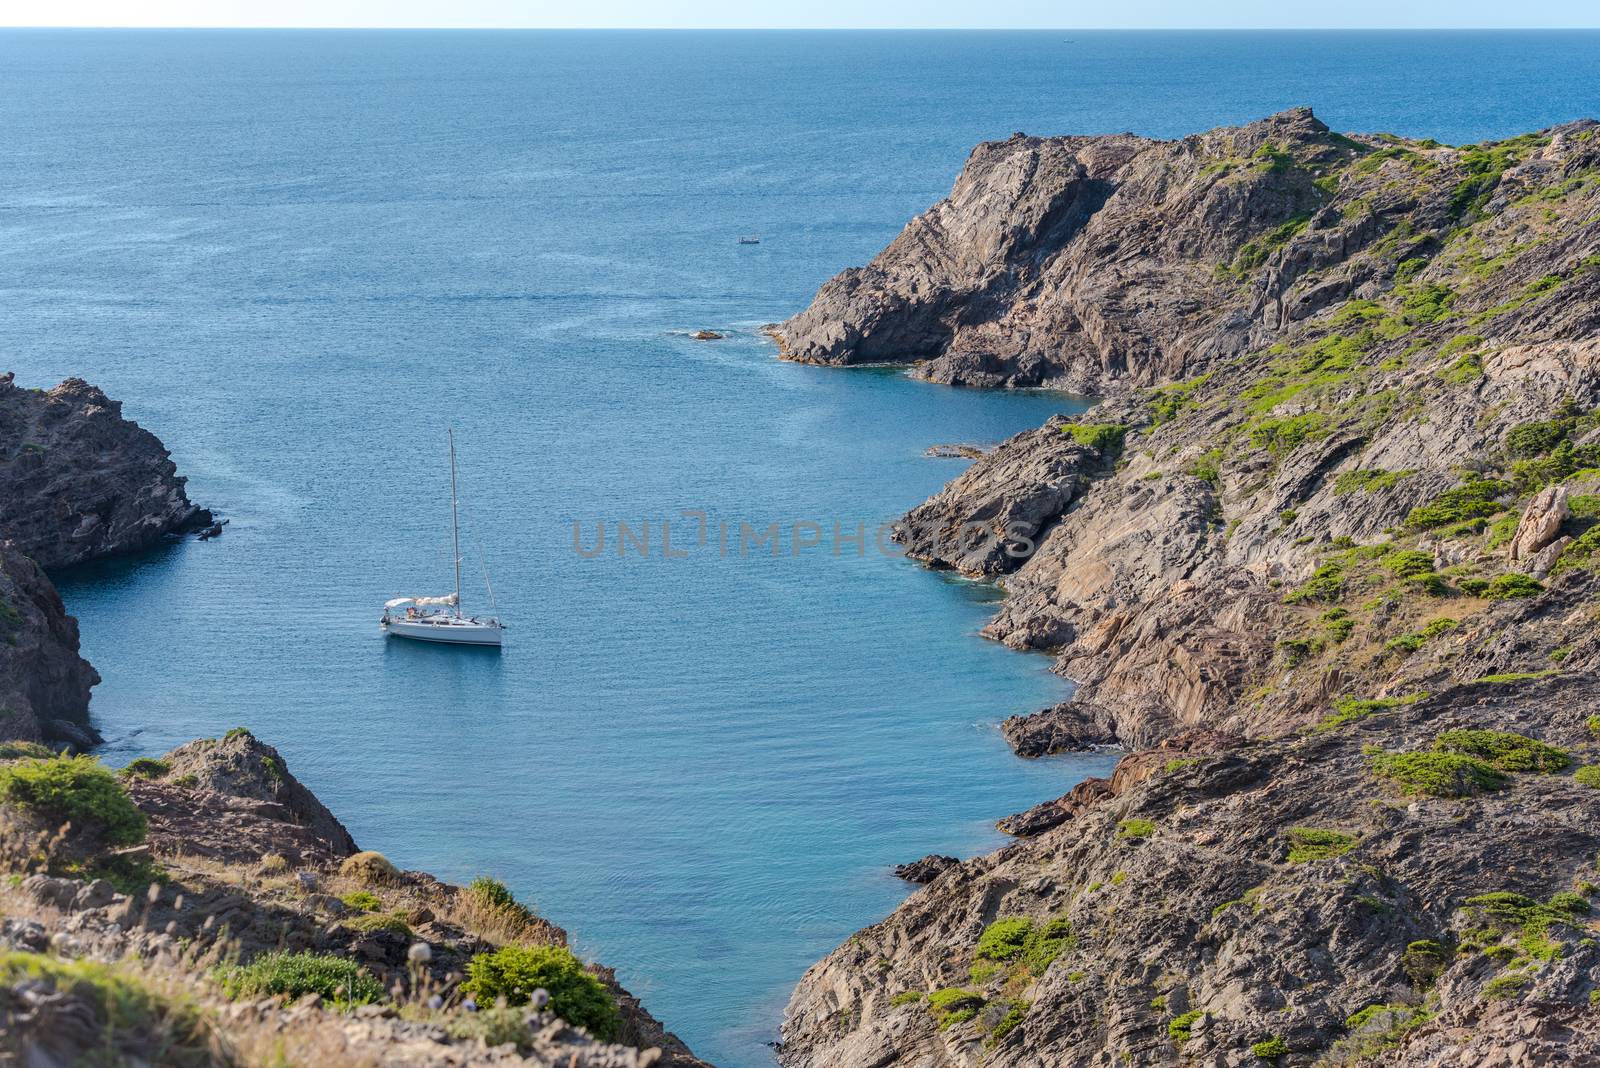 Sea landscape with Cap de Creus, natural park. Eastern point of Spain, Girona province, Catalonia. Famous tourist destination in Costa Brava. Sunny summer day with blue sky and clouds.